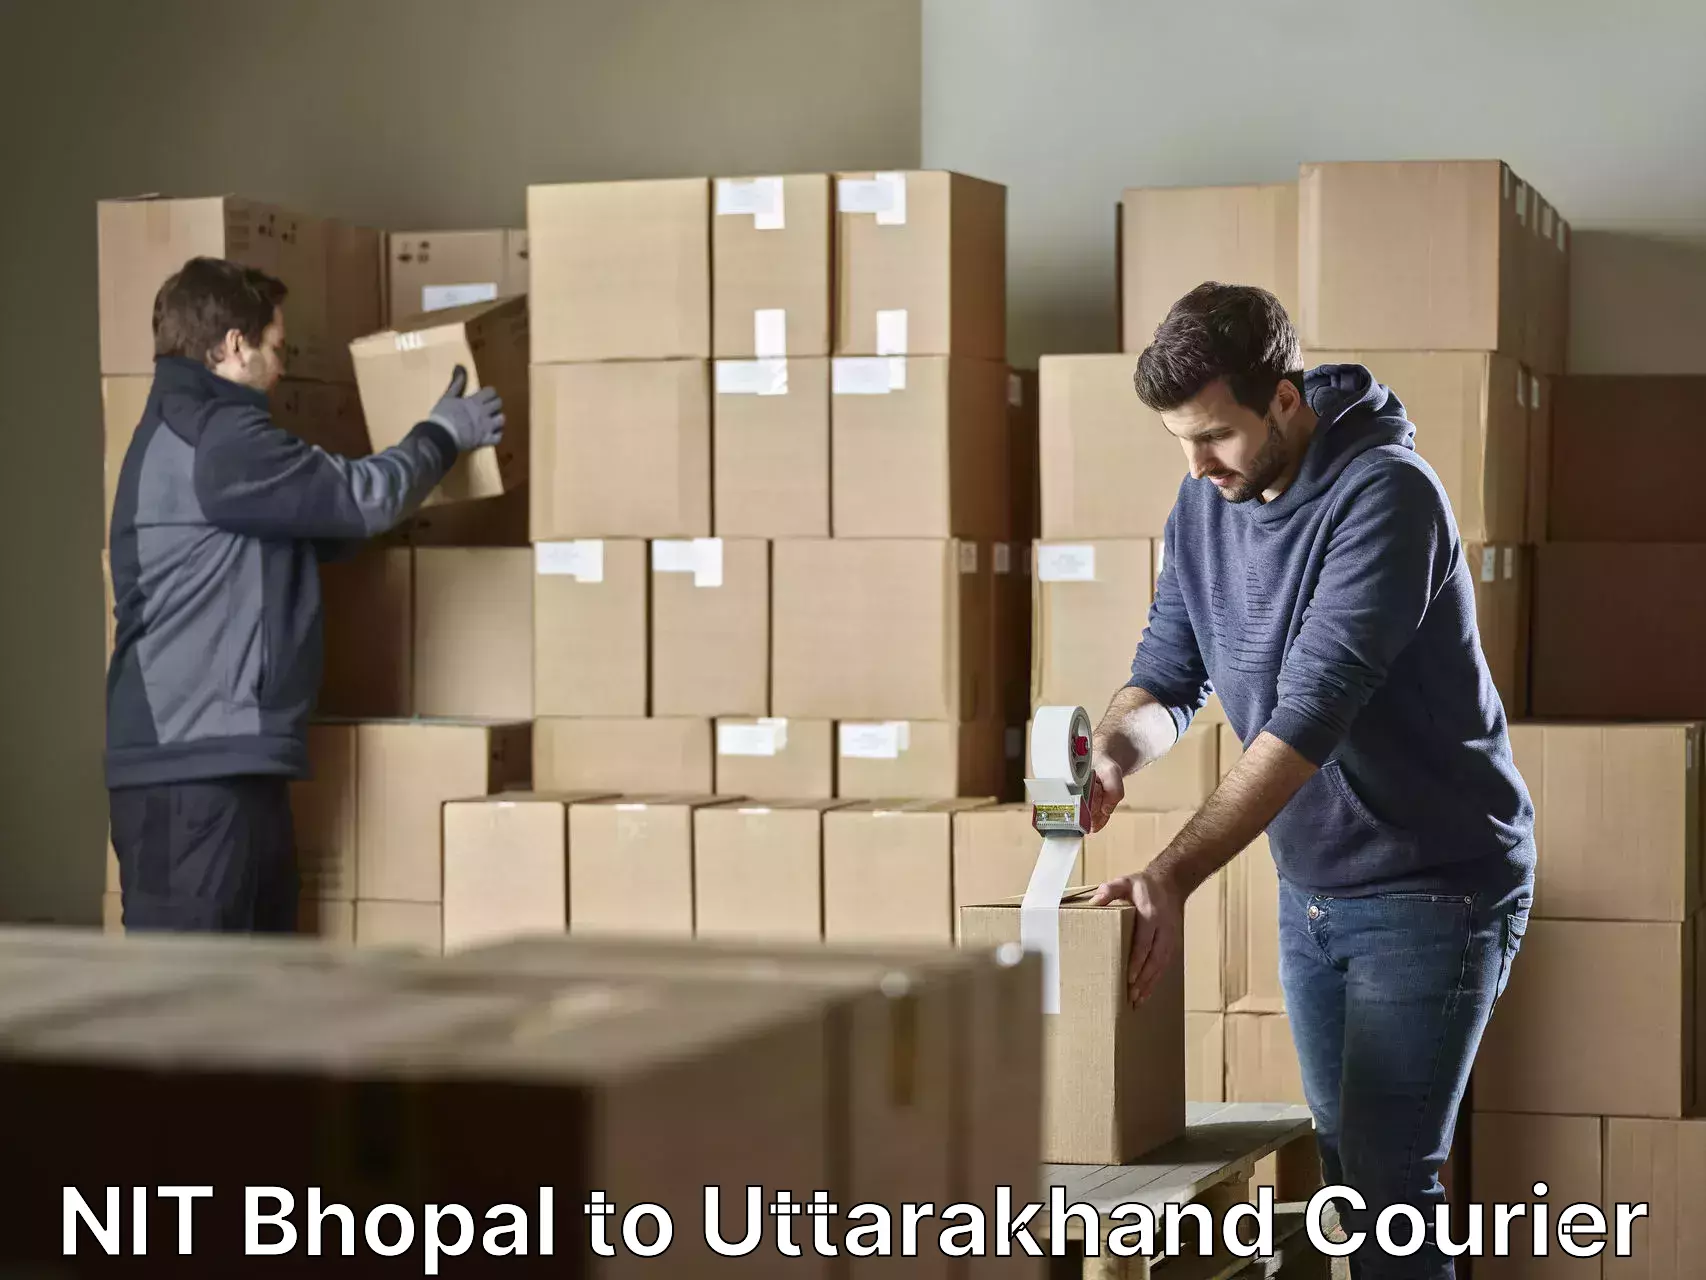 Household goods transport service NIT Bhopal to Rishikesh